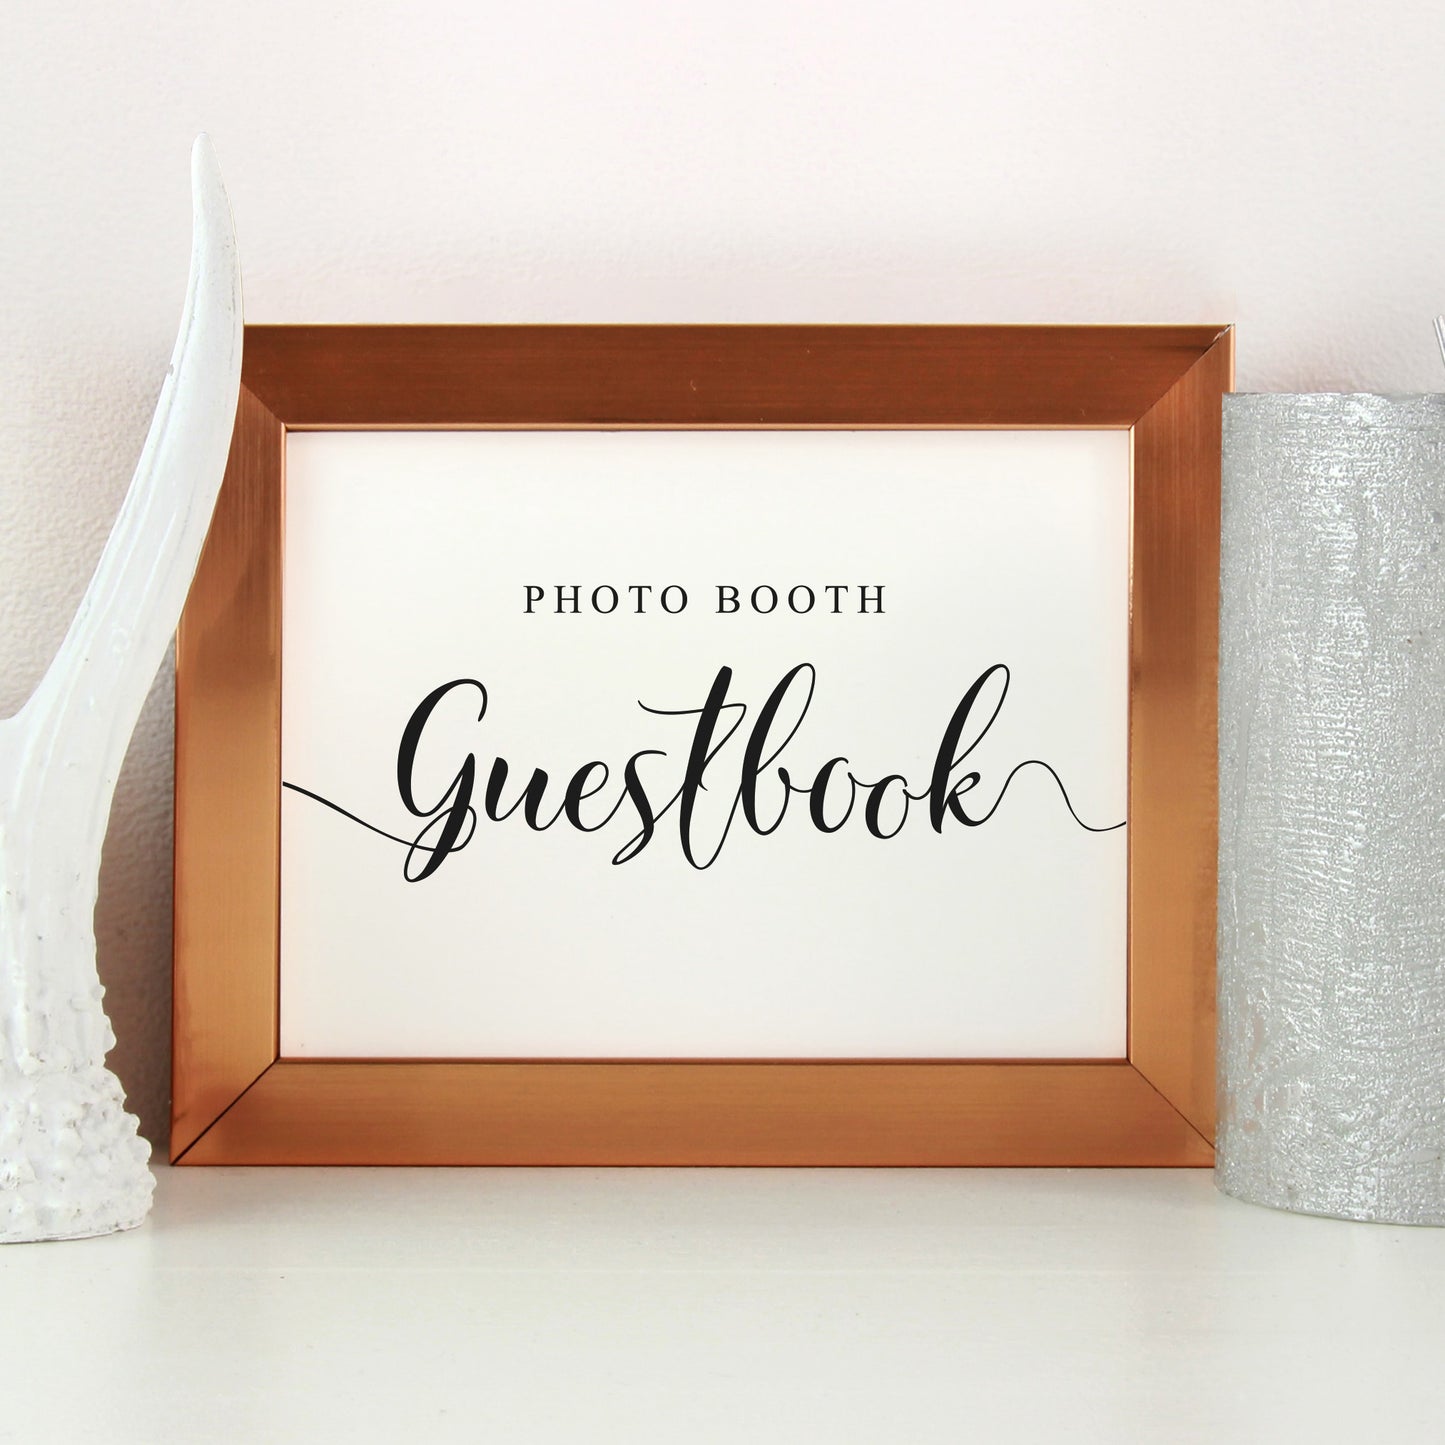 Photobooth Guestbook Sign - Digital Download